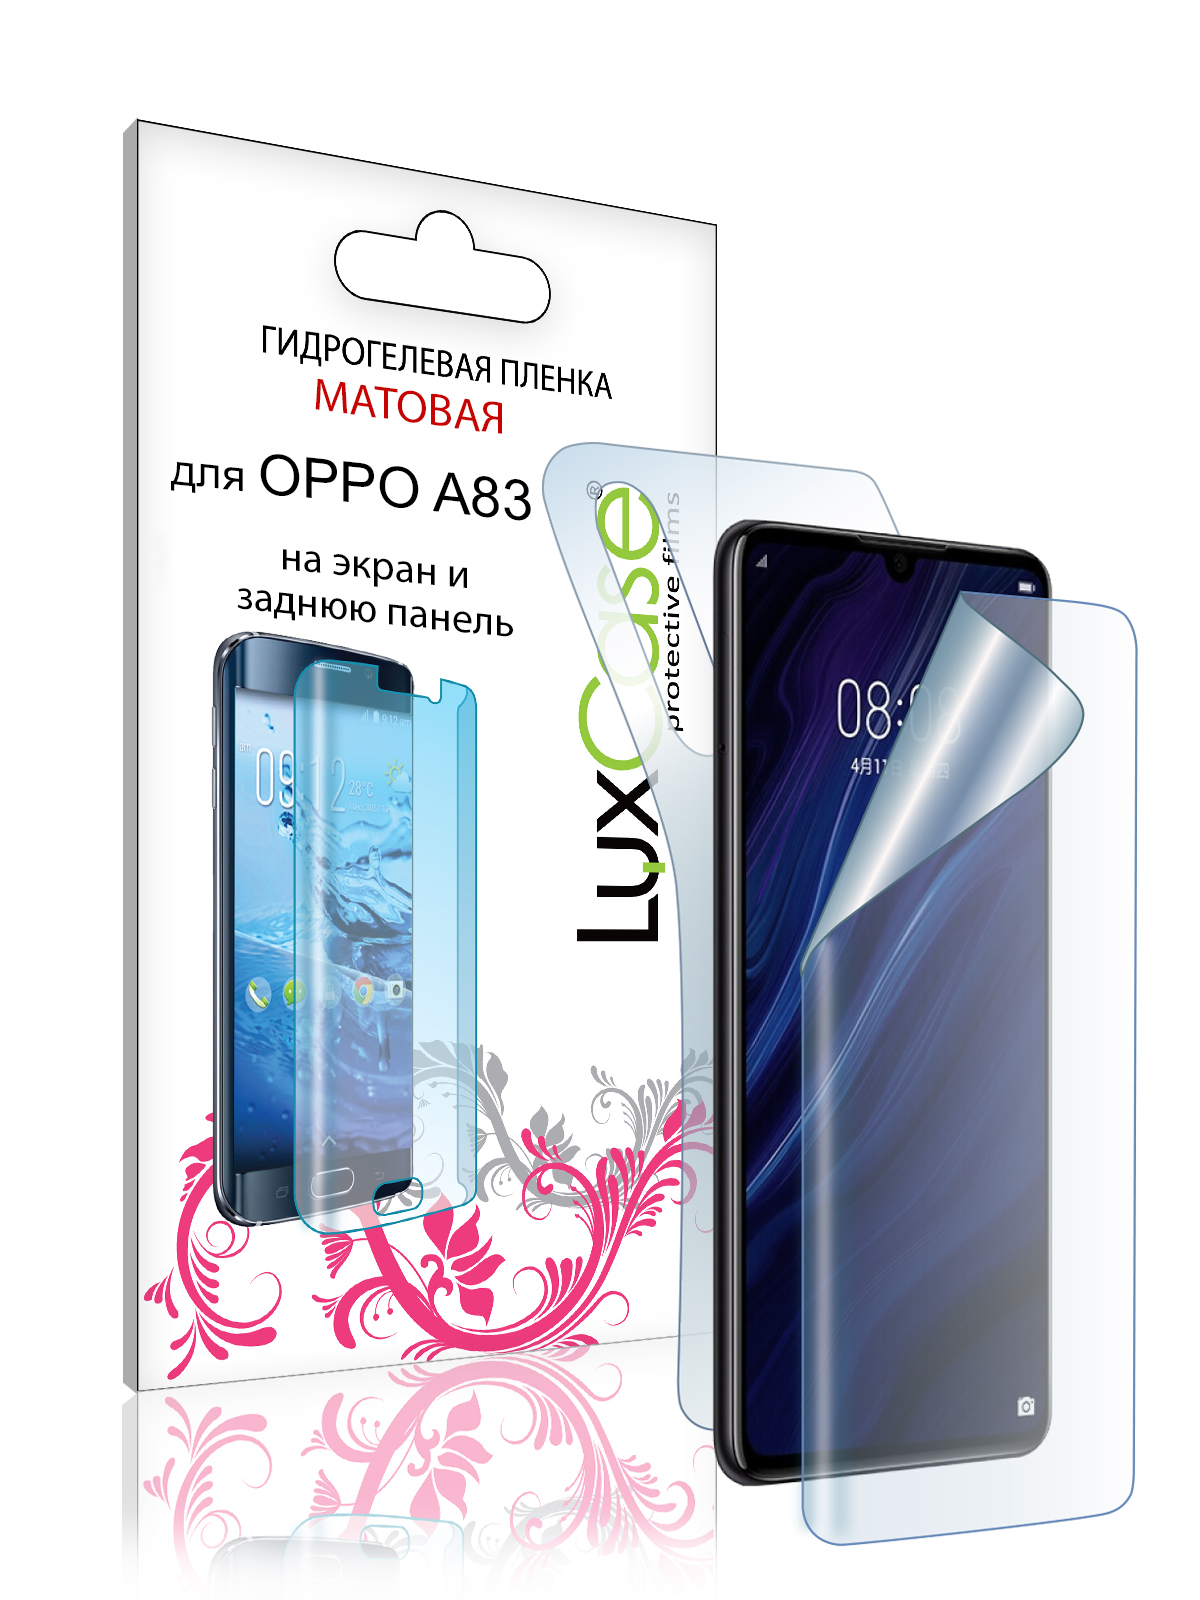 Гидрогелевая пленка LuxCase для Oppo A83 0.14mm Front and Back Transparent пленка гидрогелевая luxcase для nokia g20 front and back transparent 86394